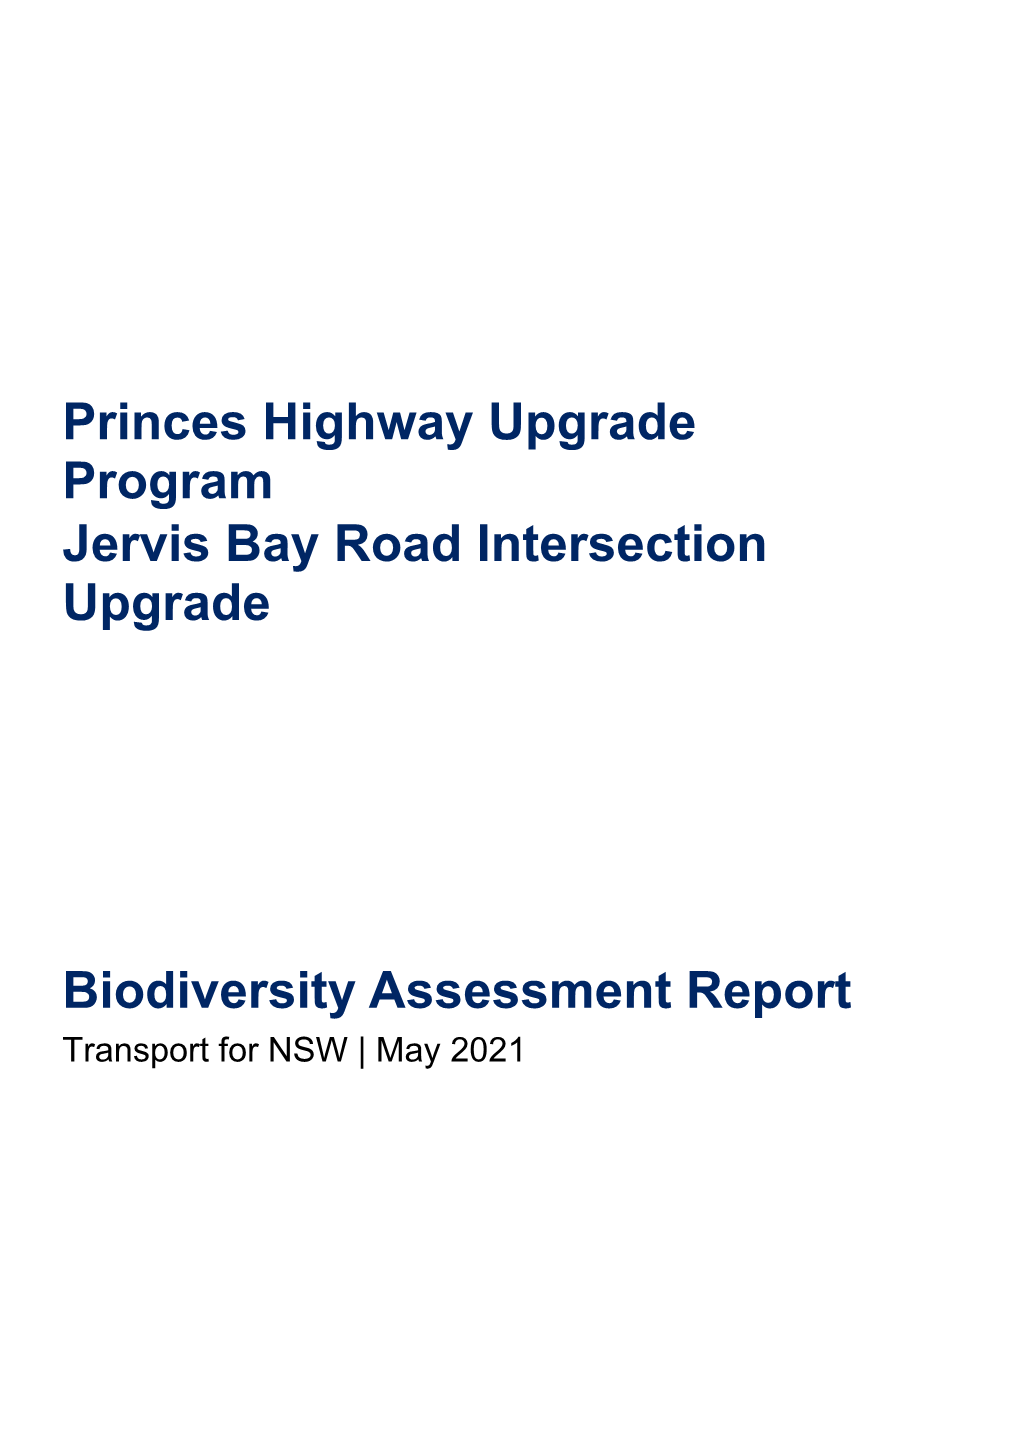 Biodiversity Assessment Report Transport for NSW | May 2021